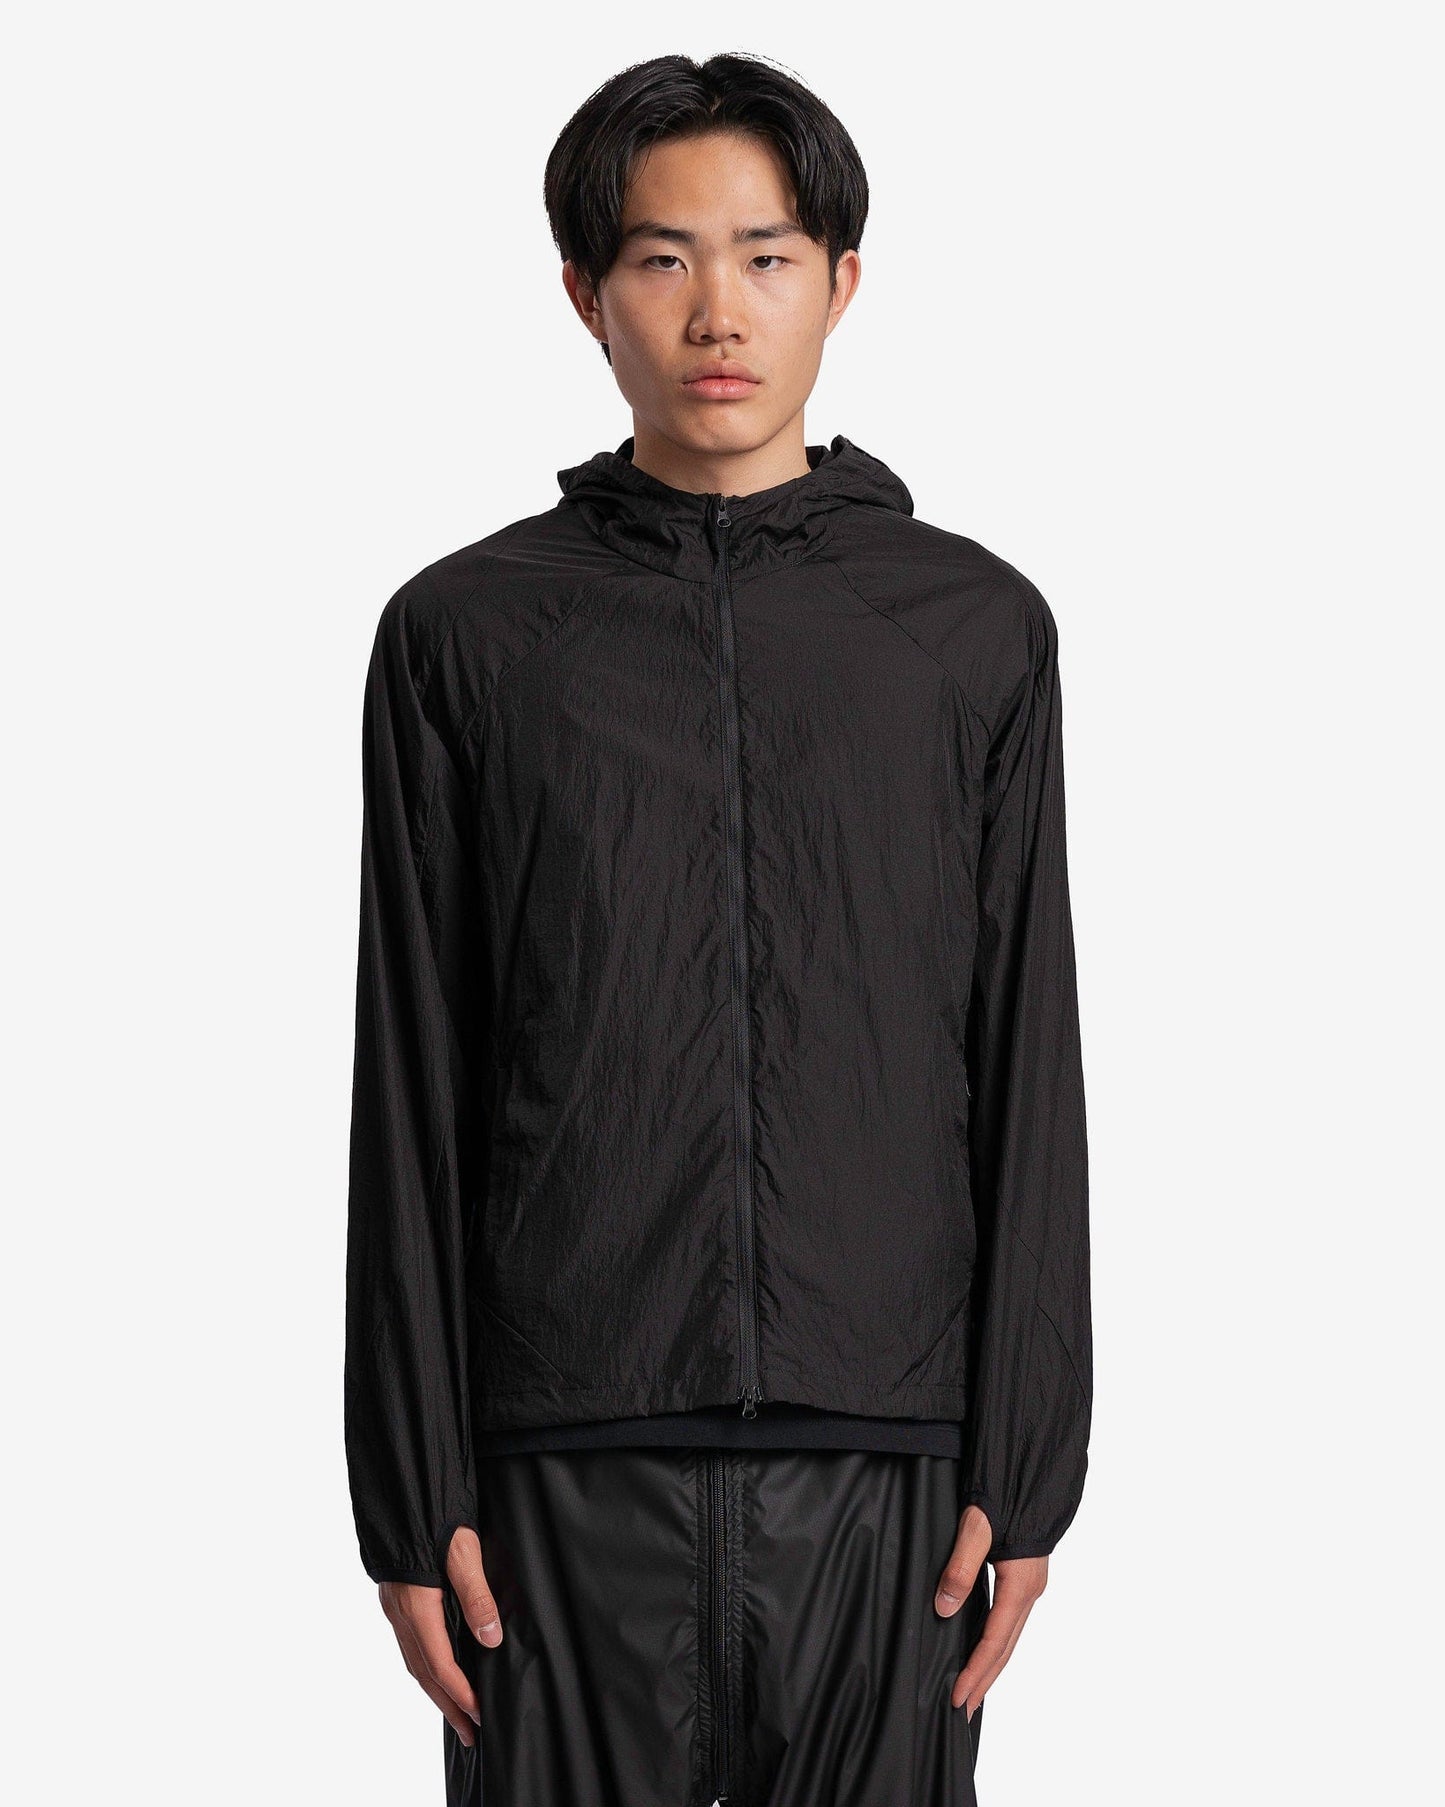 POST ARCHIVE FACTION (P.A.F) Men's Jackets 5.0+ Technical Jacket Center in Black